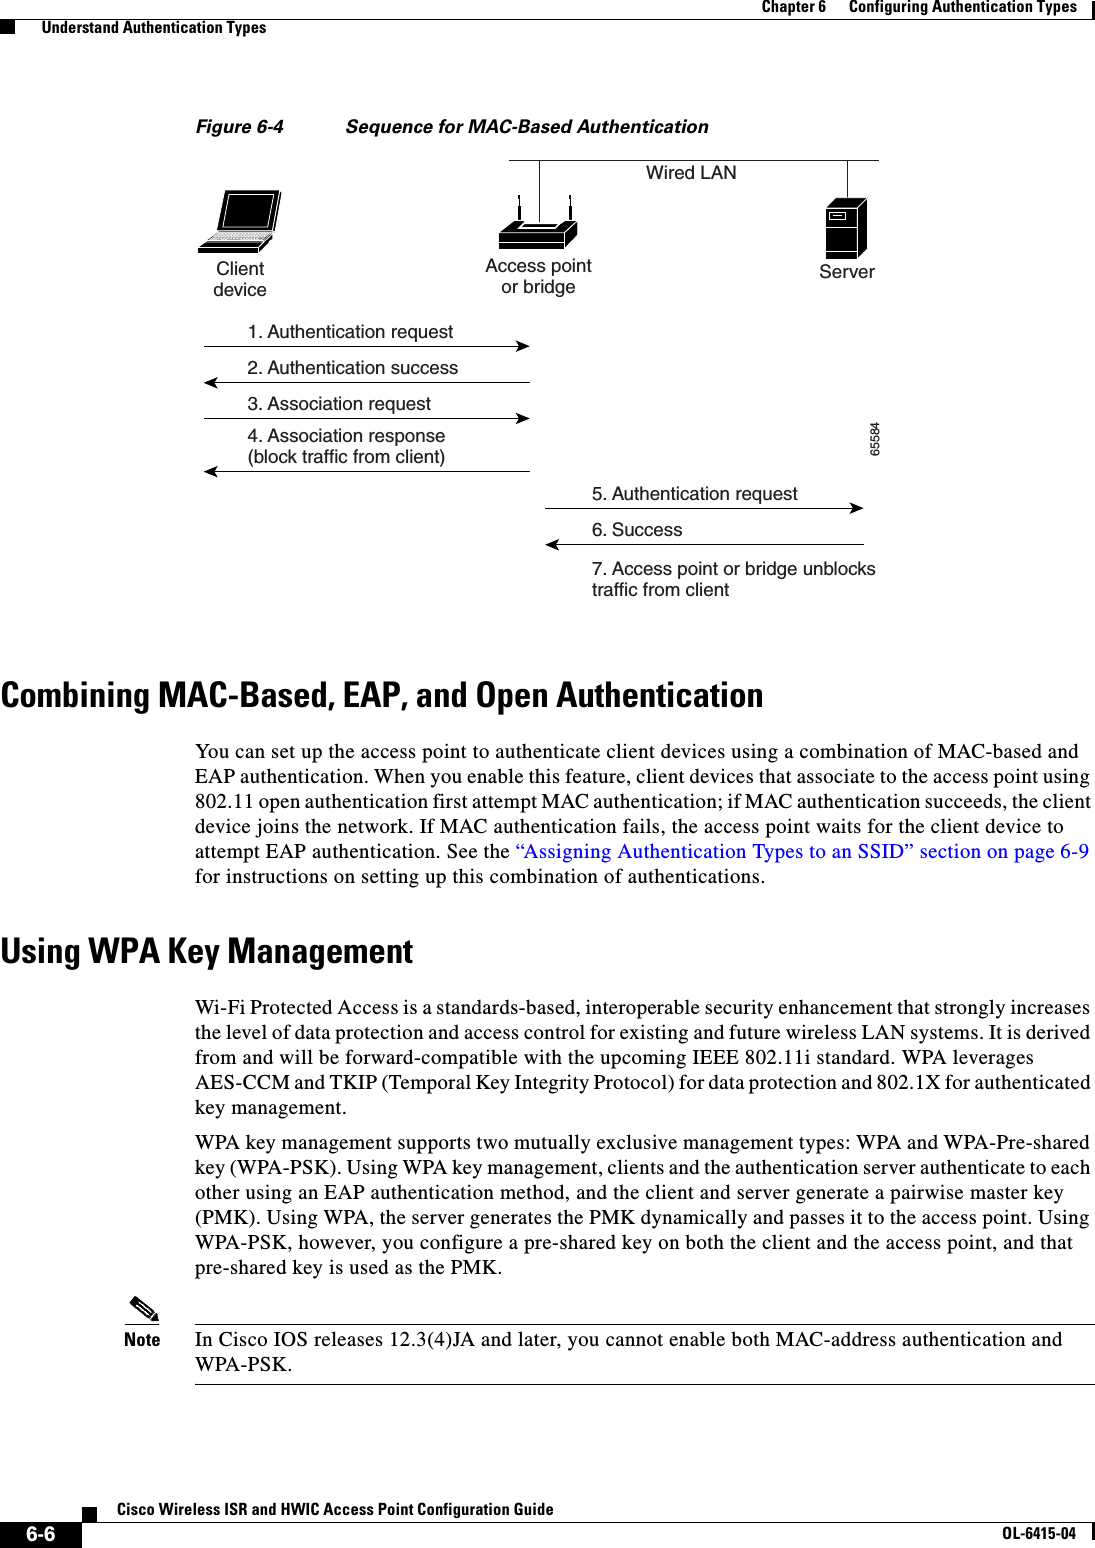 6-6Cisco Wireless ISR and HWIC Access Point Configuration GuideOL-6415-04Chapter 6      Configuring Authentication Types  Understand Authentication TypesFigure 6-4 Sequence for MAC-Based AuthenticationCombining MAC-Based, EAP, and Open AuthenticationYou can set up the access point to authenticate client devices using a combination of MAC-based and EAP authentication. When you enable this feature, client devices that associate to the access point using 802.11 open authentication first attempt MAC authentication; if MAC authentication succeeds, the client device joins the network. If MAC authentication fails, the access point waits for the client device to attempt EAP authentication. See the “Assigning Authentication Types to an SSID” section on page 6-9 for instructions on setting up this combination of authentications.Using WPA Key ManagementWi-Fi Protected Access is a standards-based, interoperable security enhancement that strongly increases the level of data protection and access control for existing and future wireless LAN systems. It is derived from and will be forward-compatible with the upcoming IEEE 802.11i standard. WPA leverages AES-CCM and TKIP (Temporal Key Integrity Protocol) for data protection and 802.1X for authenticated key management.WPA key management supports two mutually exclusive management types: WPA and WPA-Pre-shared key (WPA-PSK). Using WPA key management, clients and the authentication server authenticate to each other using an EAP authentication method, and the client and server generate a pairwise master key (PMK). Using WPA, the server generates the PMK dynamically and passes it to the access point. Using WPA-PSK, however, you configure a pre-shared key on both the client and the access point, and that pre-shared key is used as the PMK.Note In Cisco IOS releases 12.3(4)JA and later, you cannot enable both MAC-address authentication and WPA-PSK.Access pointor bridgeWired LANClientdevice Server1. Authentication request2. Authentication success3. Association request4. Association response(block traffic from client)5. Authentication request6. Success7. Access point or bridge unblockstraffic from client65584